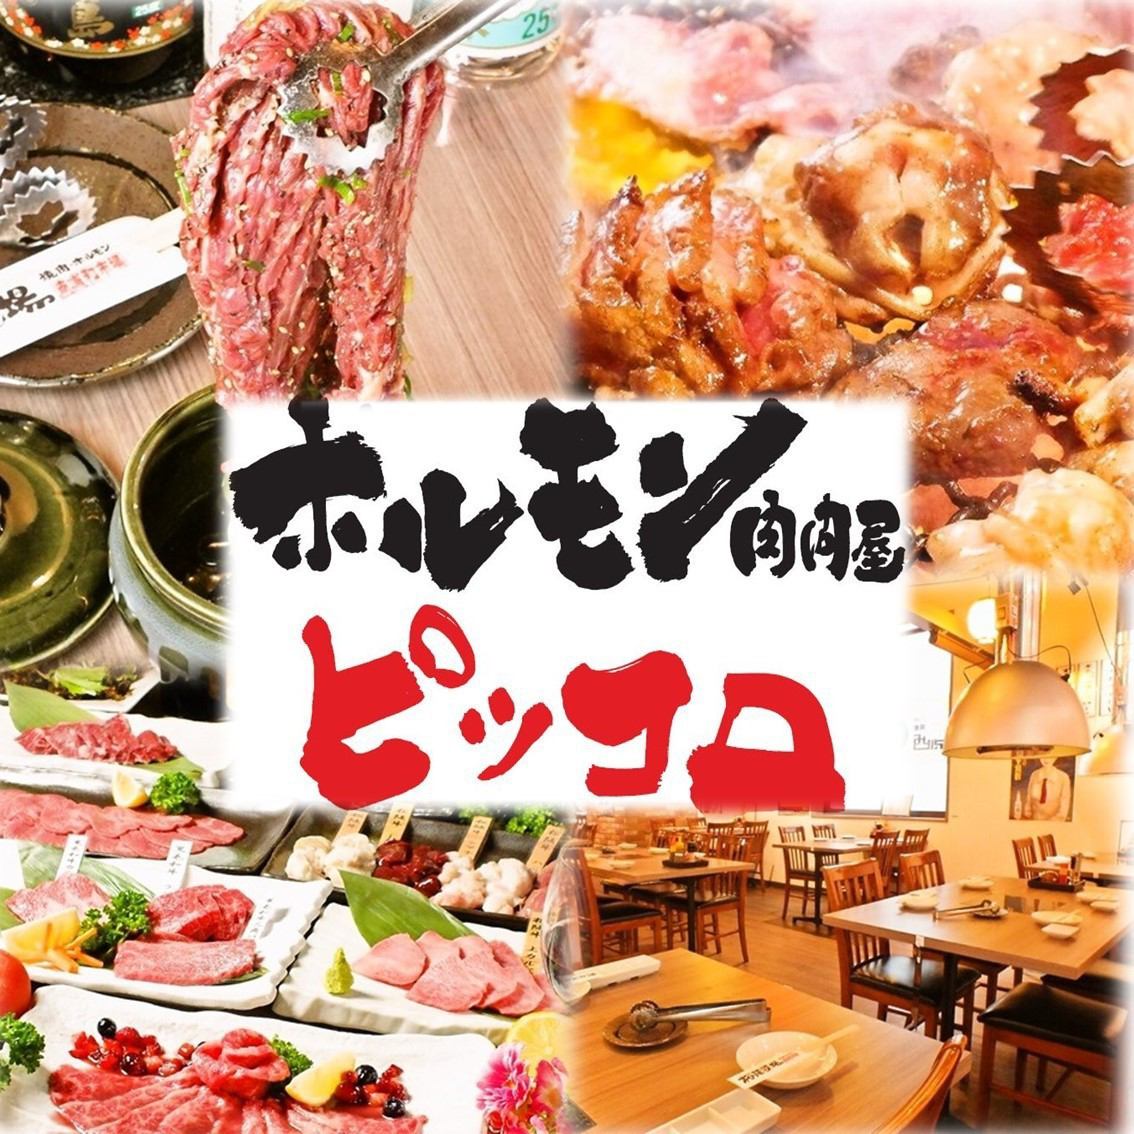 Click here for Minamiura Wa Yakiniku, where you can enjoy delicious meat while tasting it.